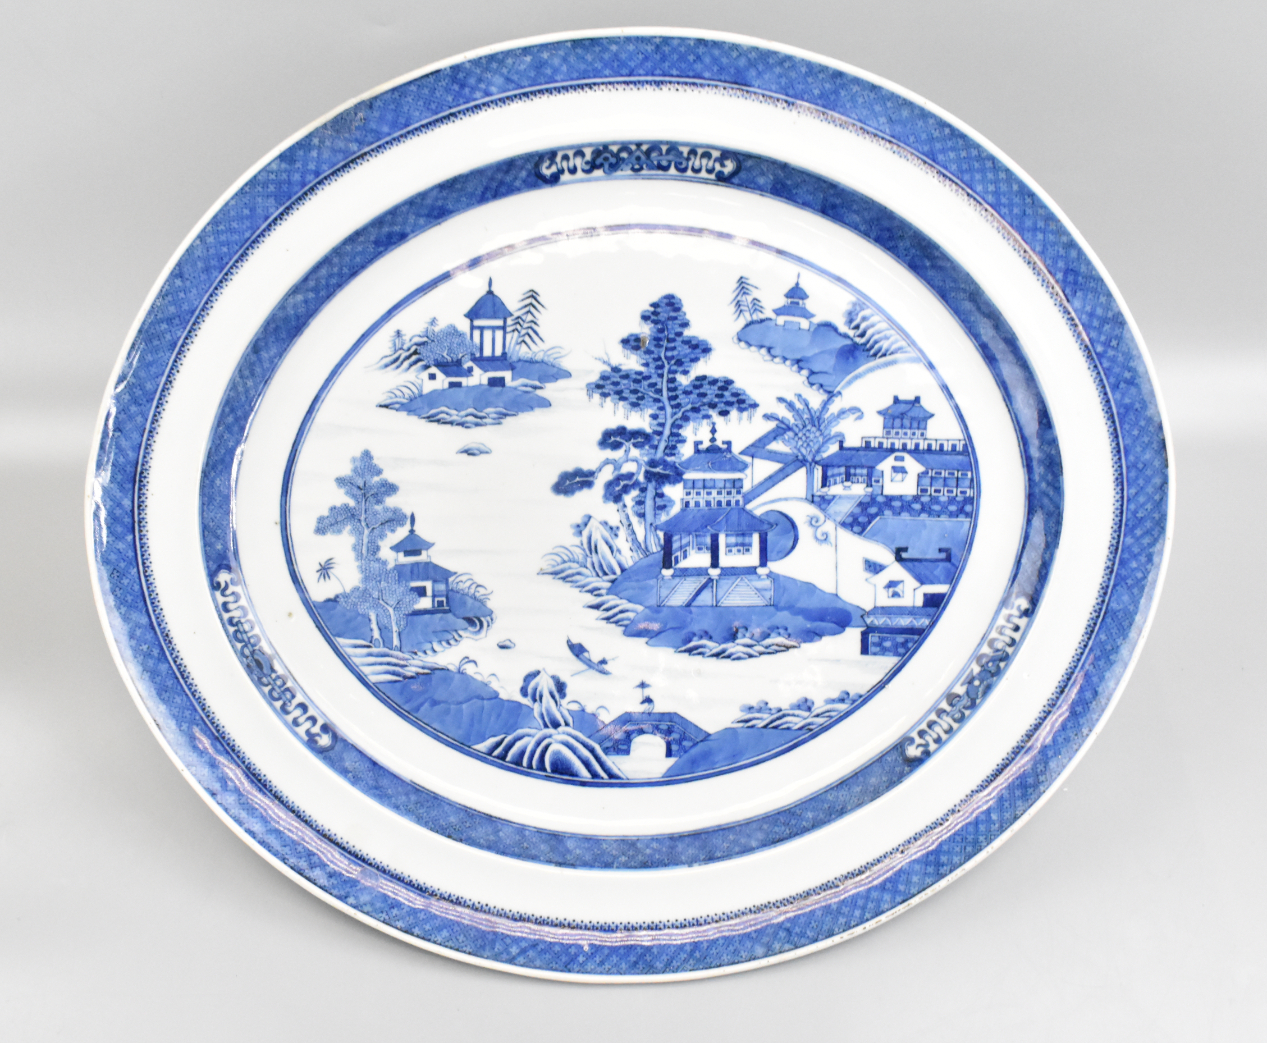 LARGE BLUE & WHITE EXPORT PLATE, 19TH